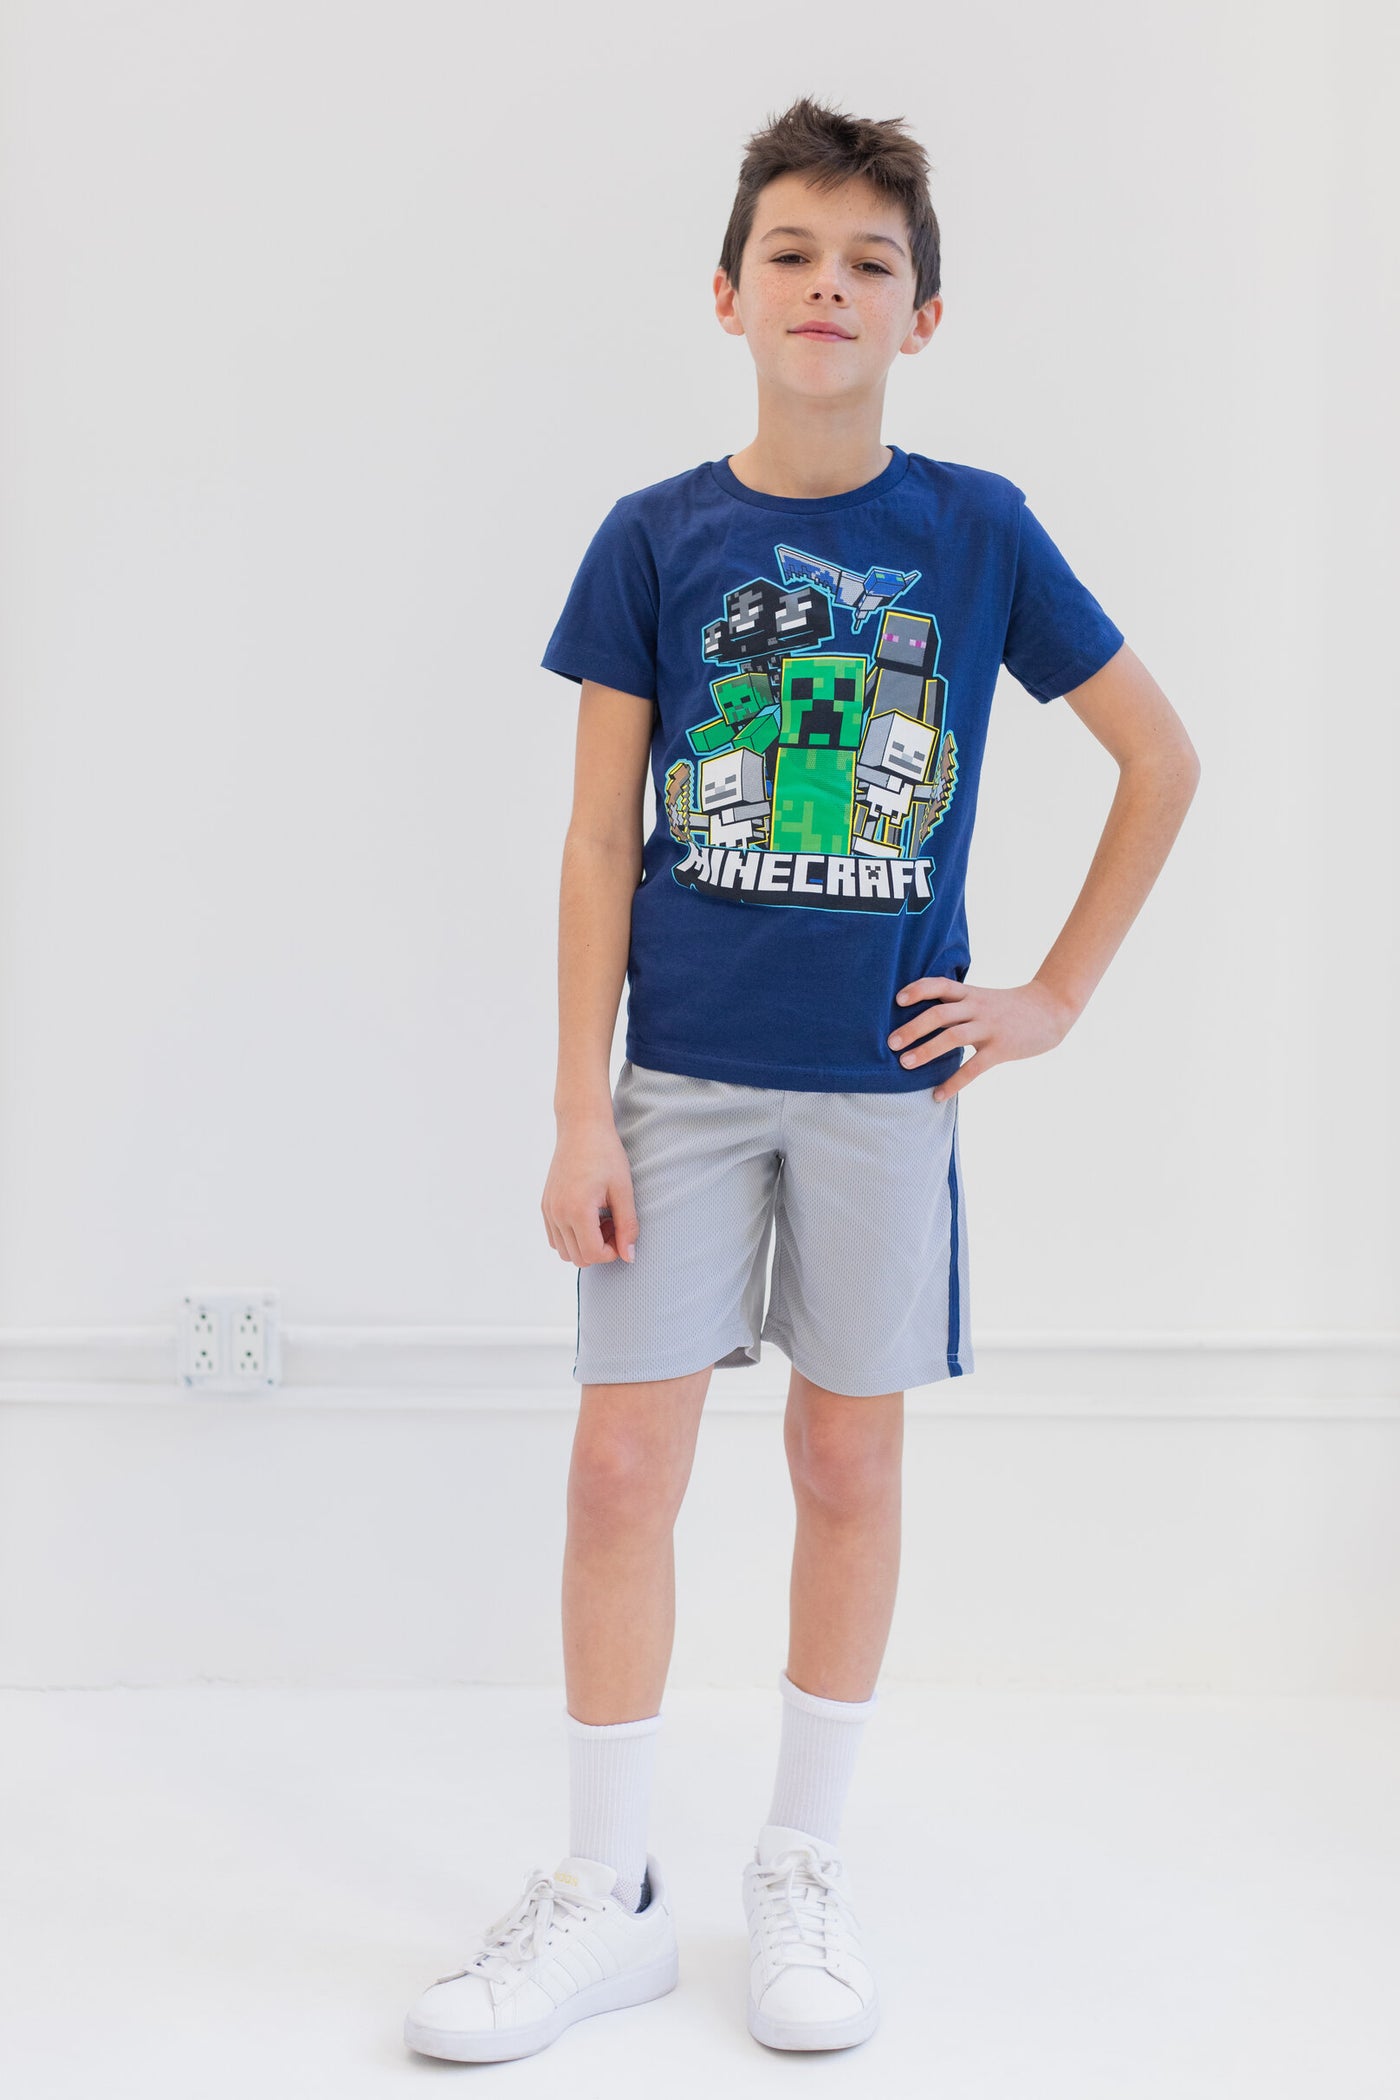 Minecraft Athletic Pullover T-Shirt Mesh Shorts Outfit Set